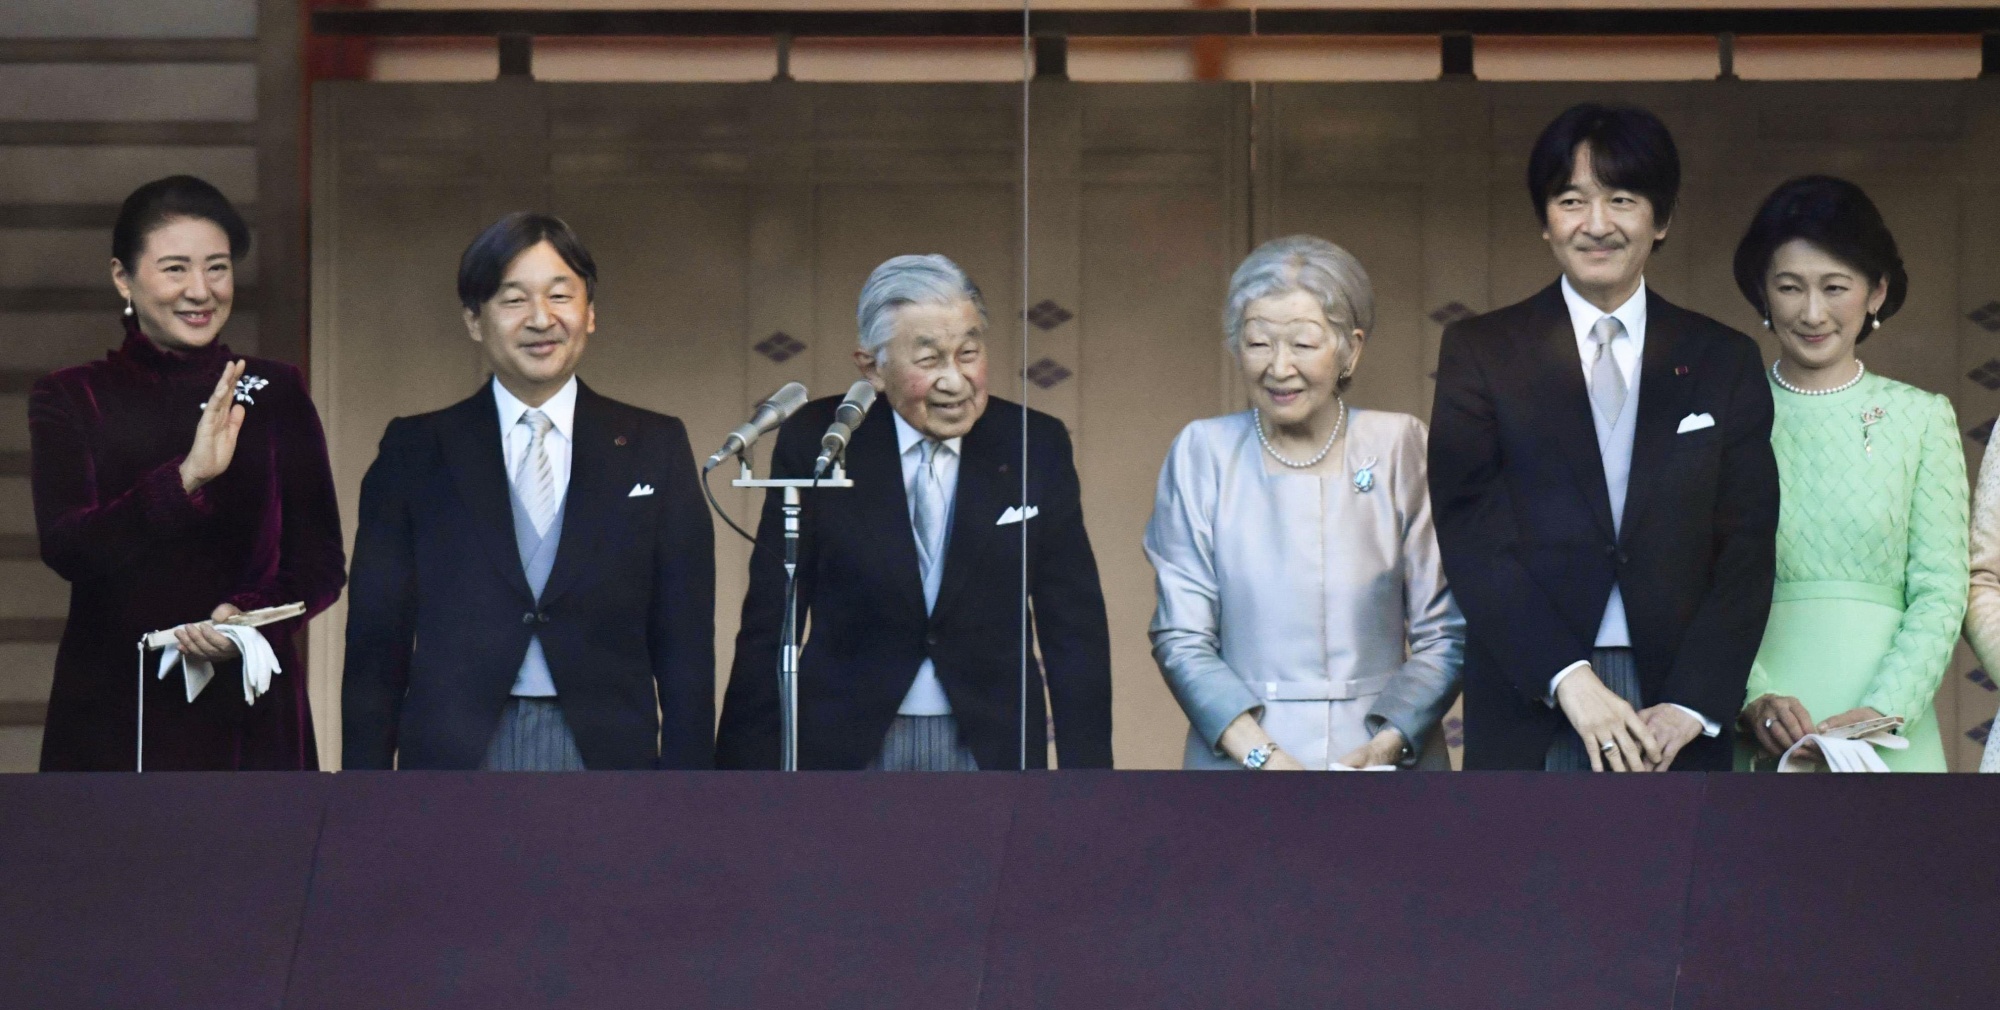 Emperor Emeritus Akihito and Empress Emerita Michiko, then emperor and empress, greet New Year well-wishers along with other members of the imperial family at the Imperial Palace on Jan. 2. | KYODO